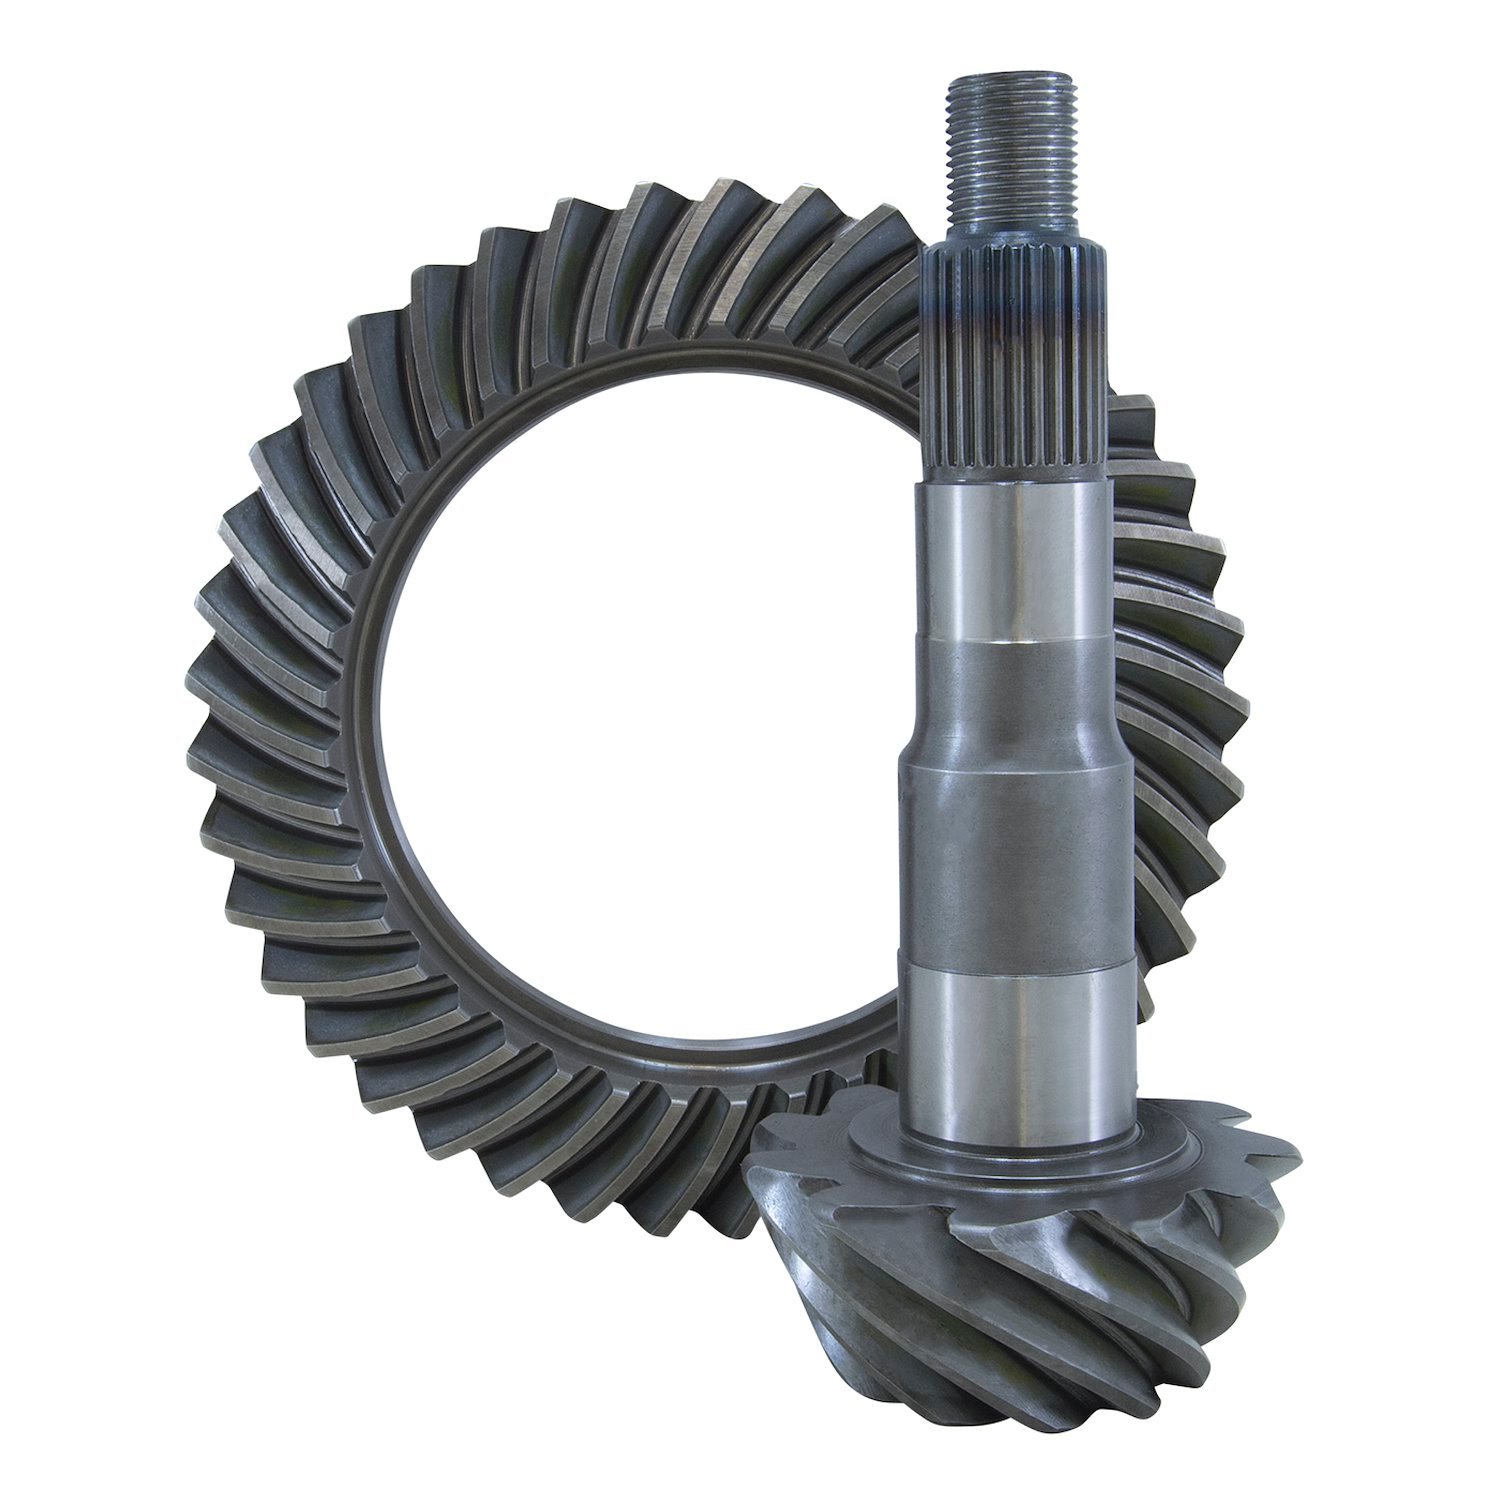 USA Standard 36057 Replacement Ring & Pinion Gear Set, For Dana 44Hd In 3.73 Ratio